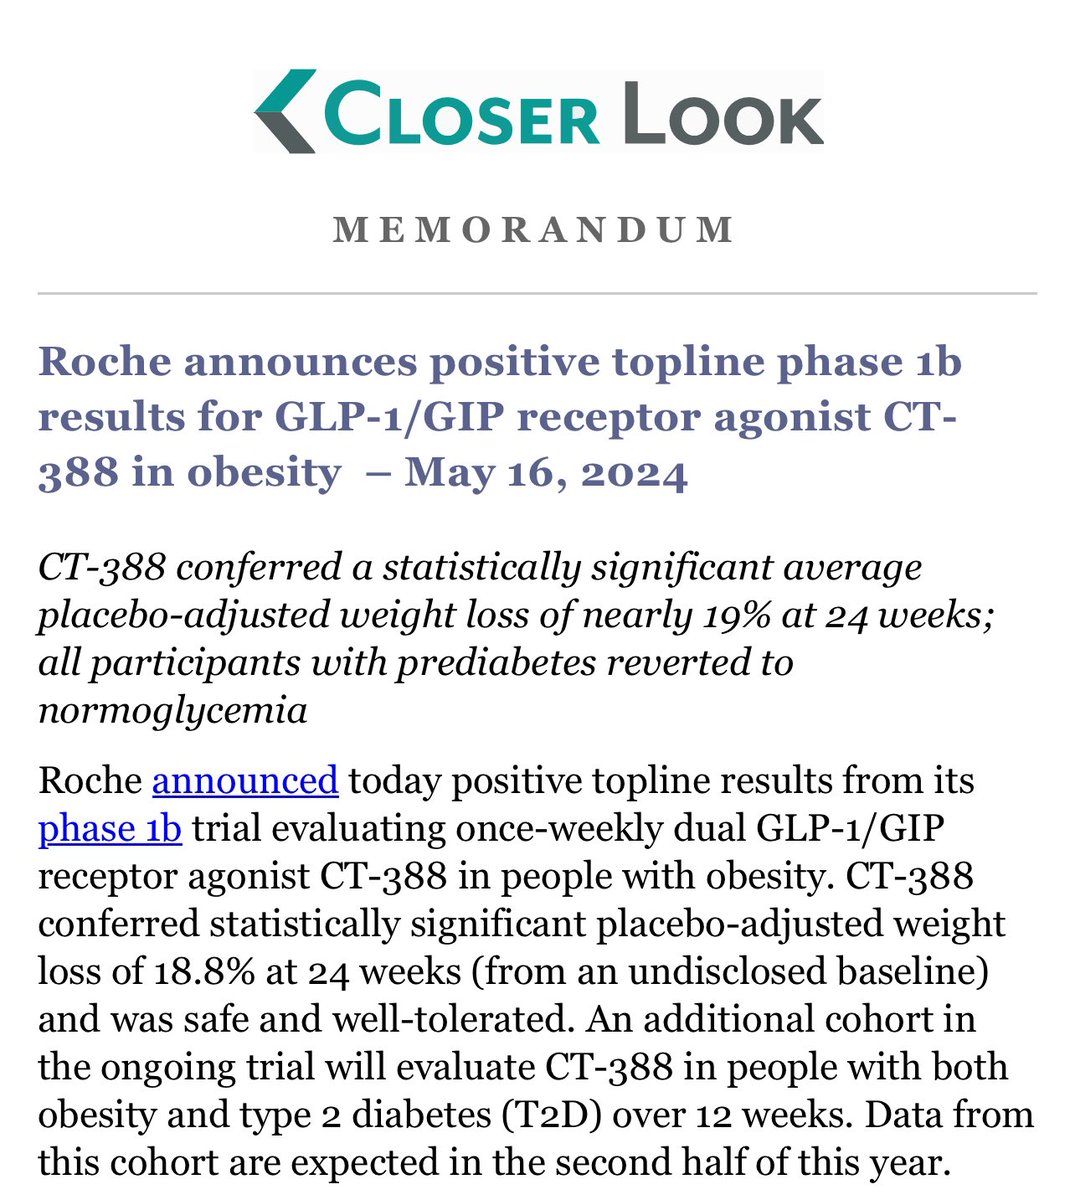 Roche releases top line results from Ph1b trial for obesity drug candidate CT-388 (GLP-1/GIP agonist): 💡100% resolution of prediabetes 💡~19% TBWL at 24 weeks Competition is heating up! 🔥